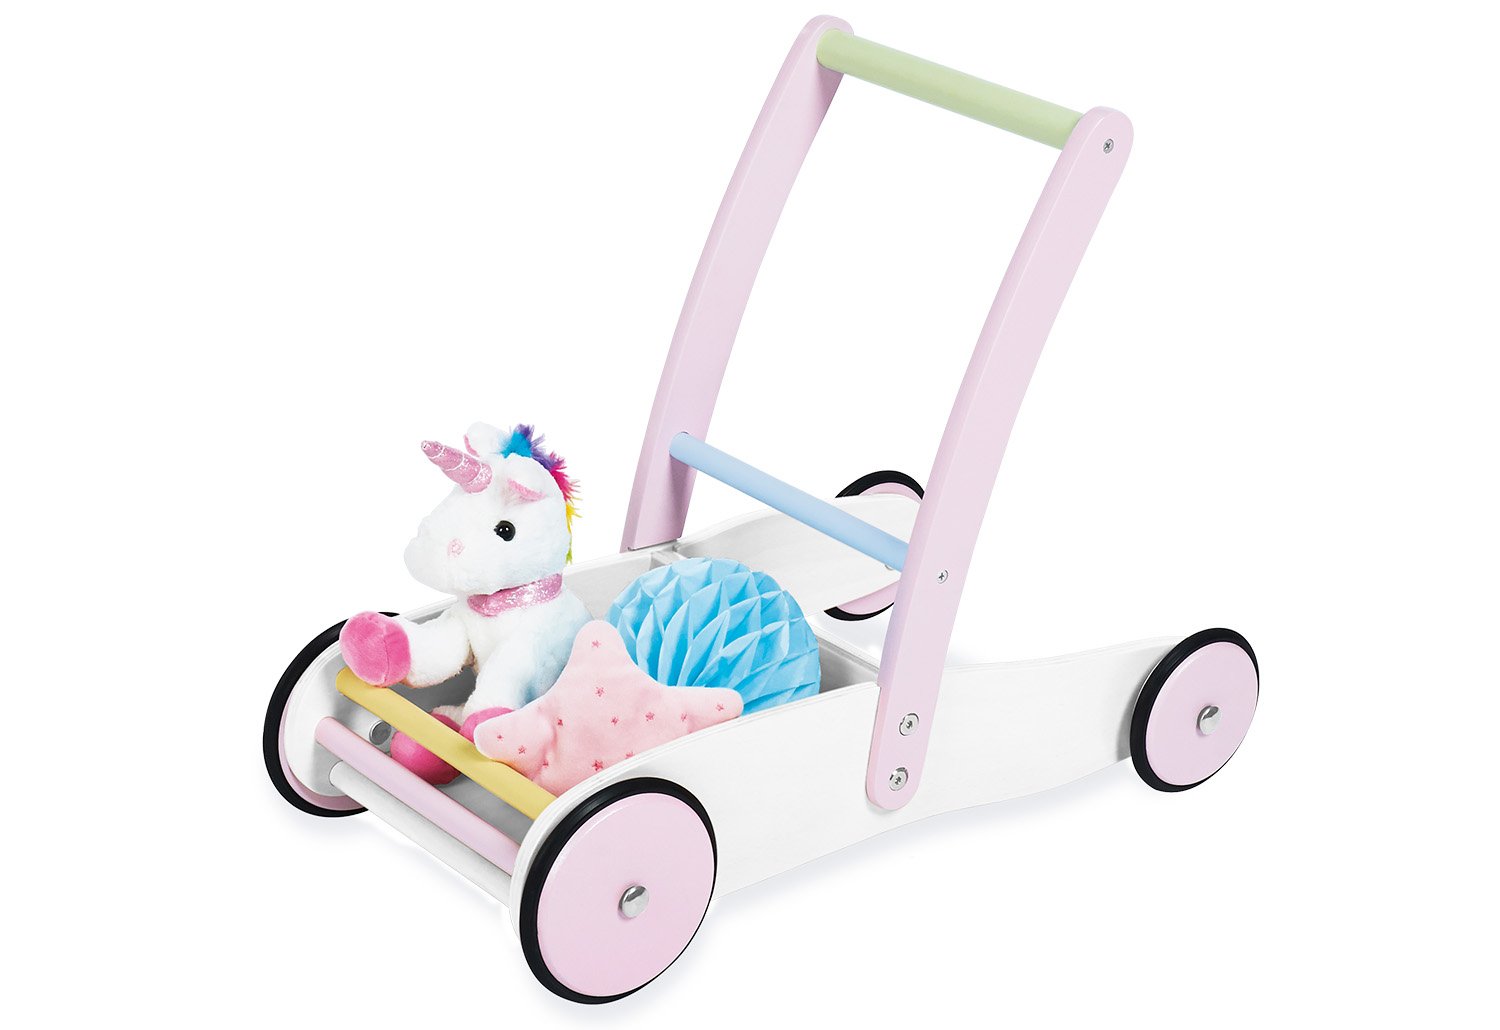 Pinolino Wooden Walker Unicorn with Brake System and Rubber Wooden Wheels with Sticker Sheet for Children 1 Year and Up